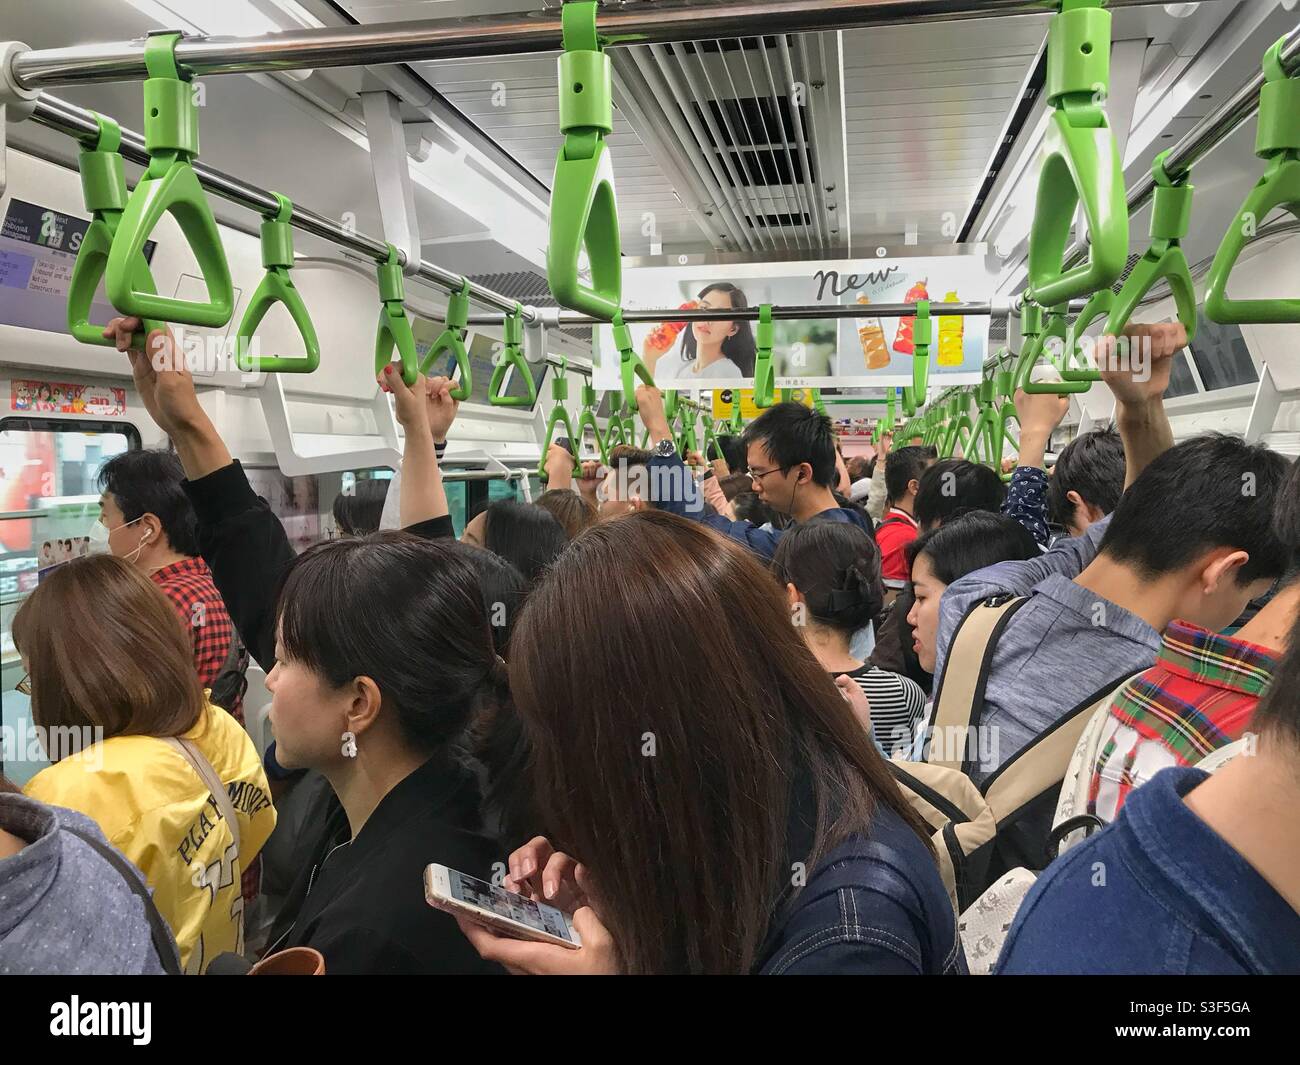 Crowded train carriage in Tokyo, Japan Stock Photo